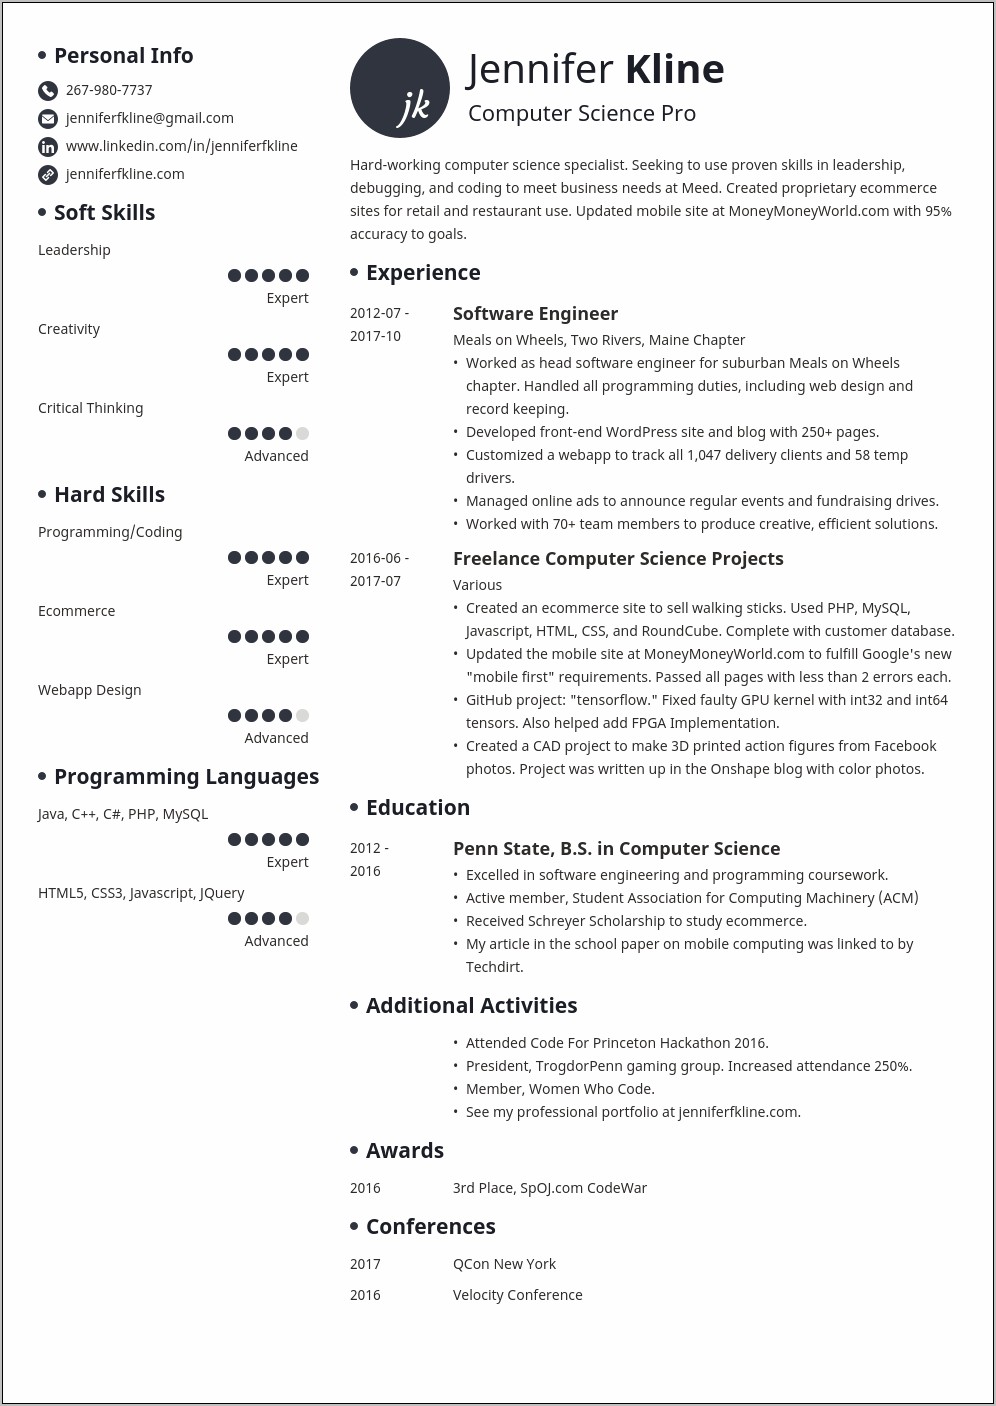 Do Volungeer Hours Look Good On A Resume